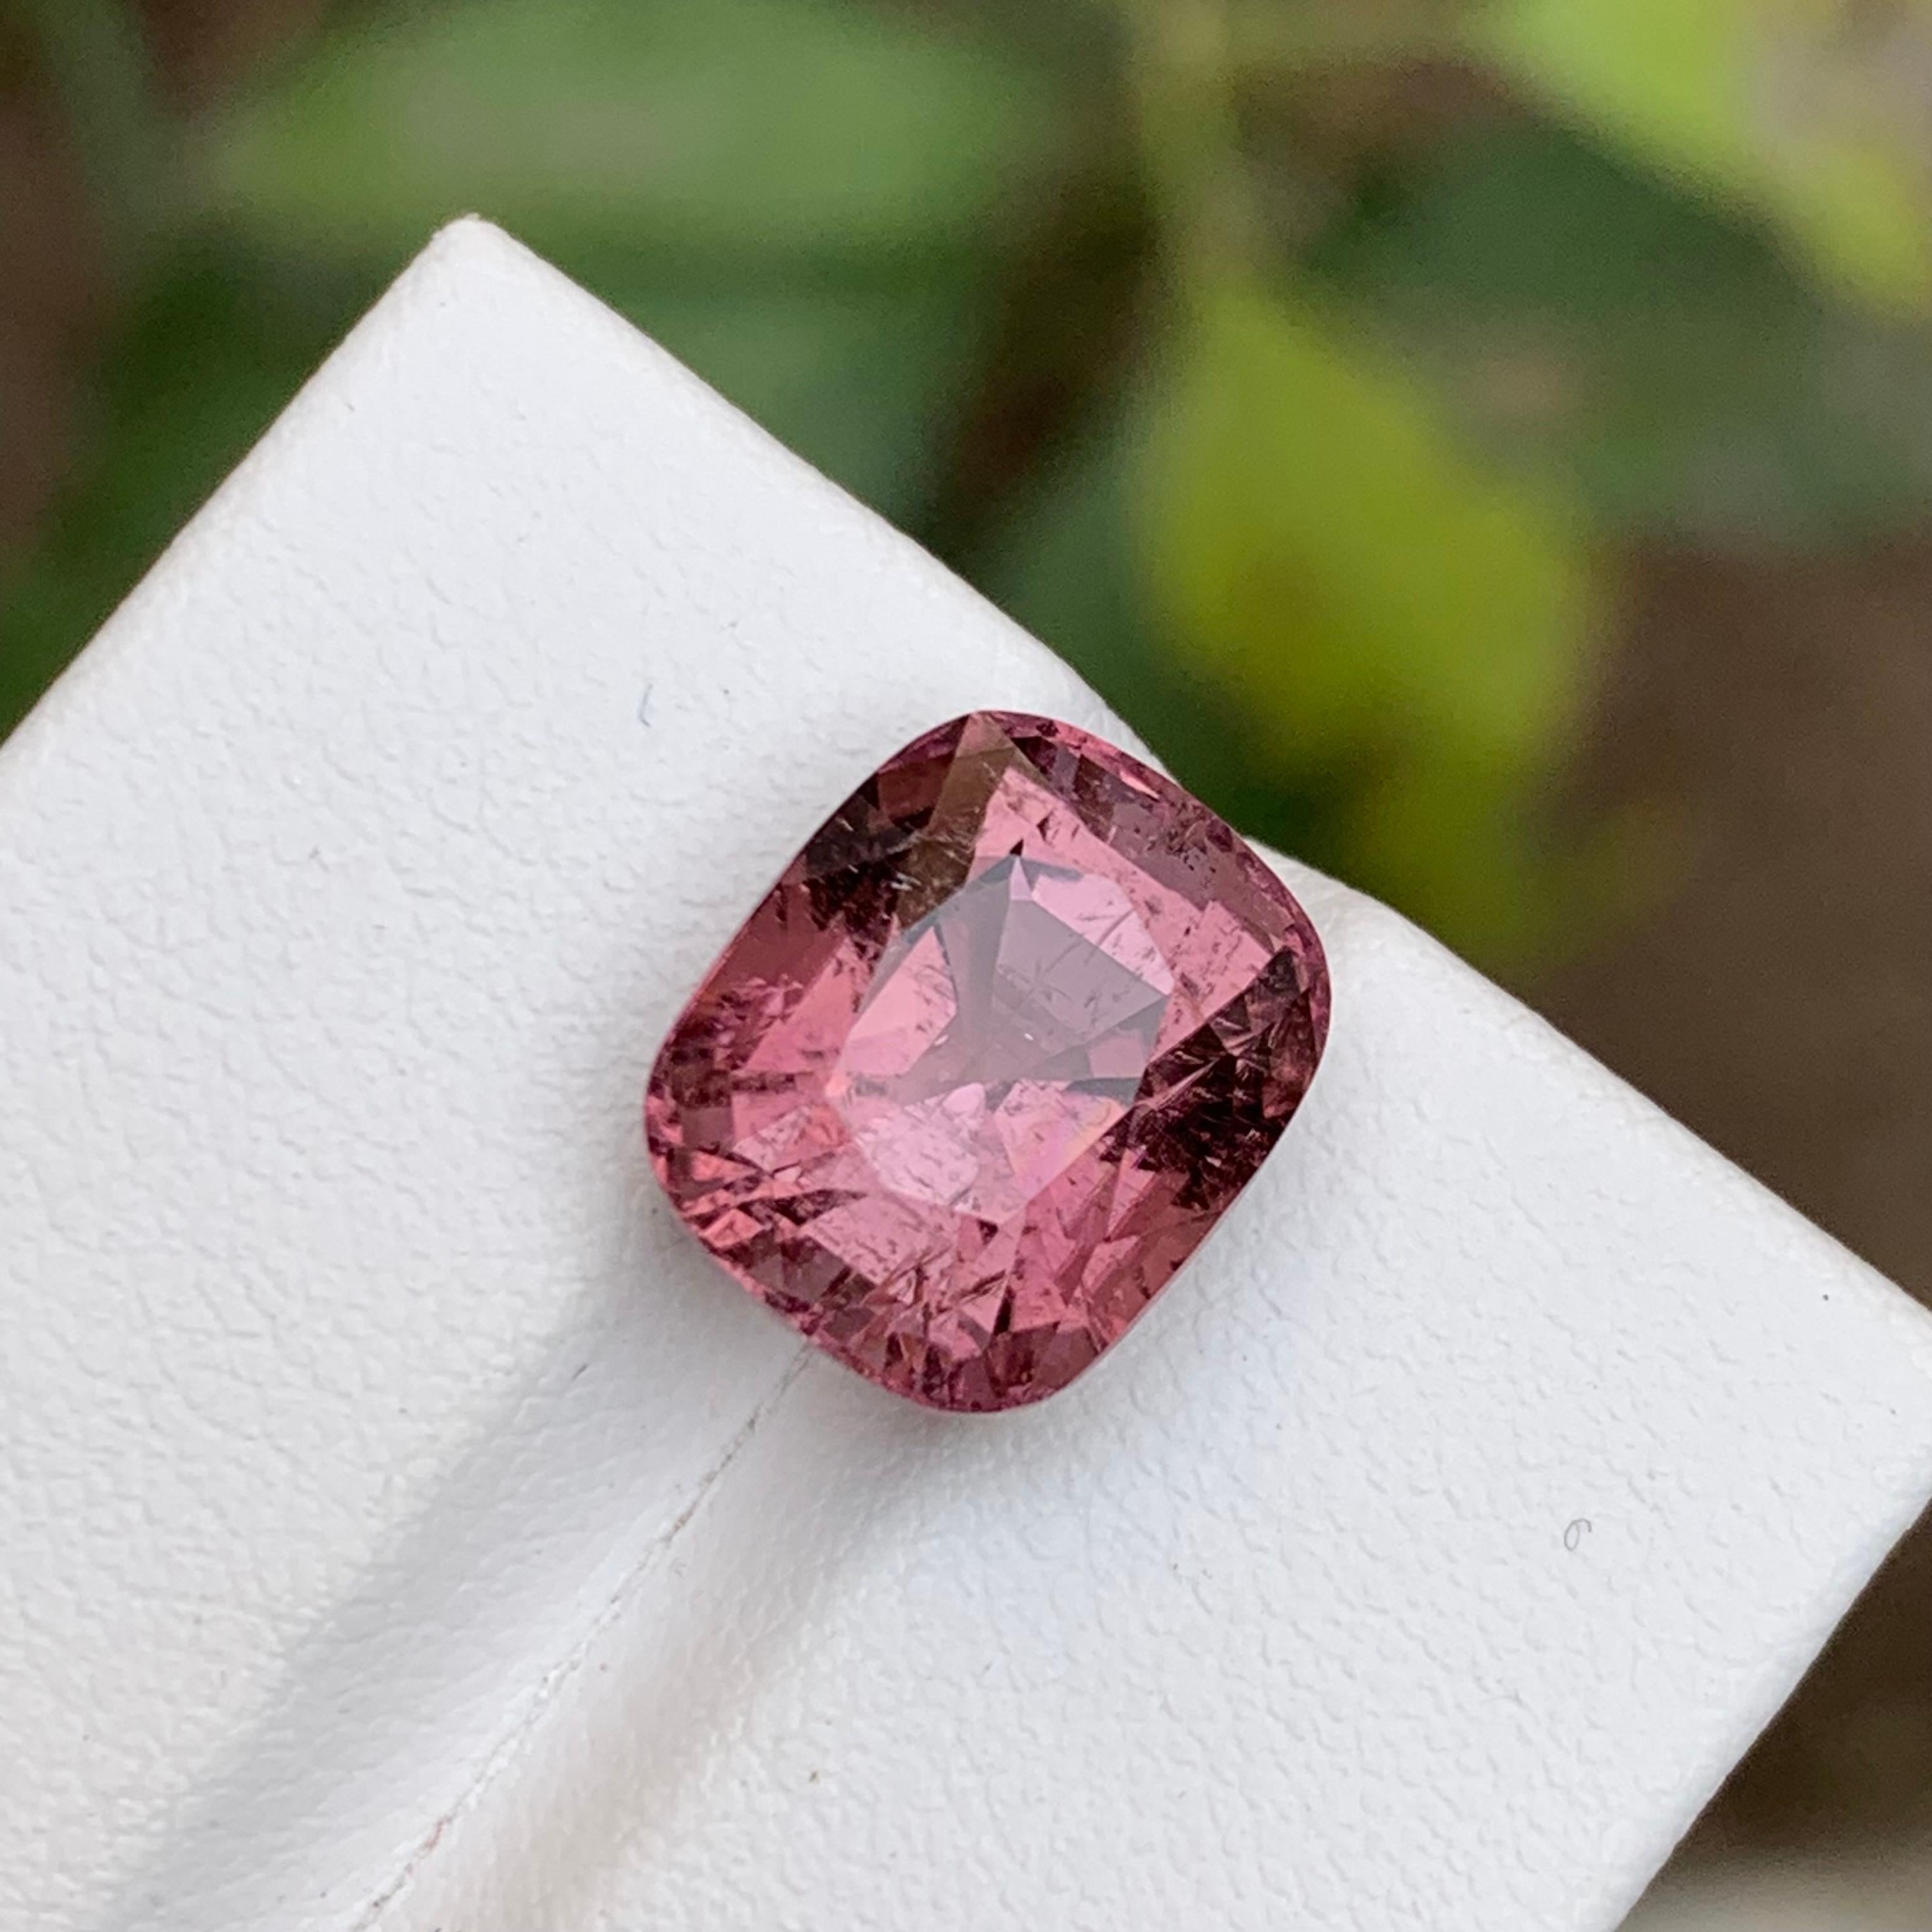 GEMSTONE TYPE: Tourmaline
PIECE(S): 1
WEIGHT: 7.50 Carats
SHAPE: Cushion 
SIZE (MM): 11.80 x 9.79 x 8.90
COLOR: Soft Pink
CLARITY: Slightly Included 
TREATMENT: Heated
ORIGIN: Afghanistan
CERTIFICATE: On demand

Behold a masterpiece of nature, a